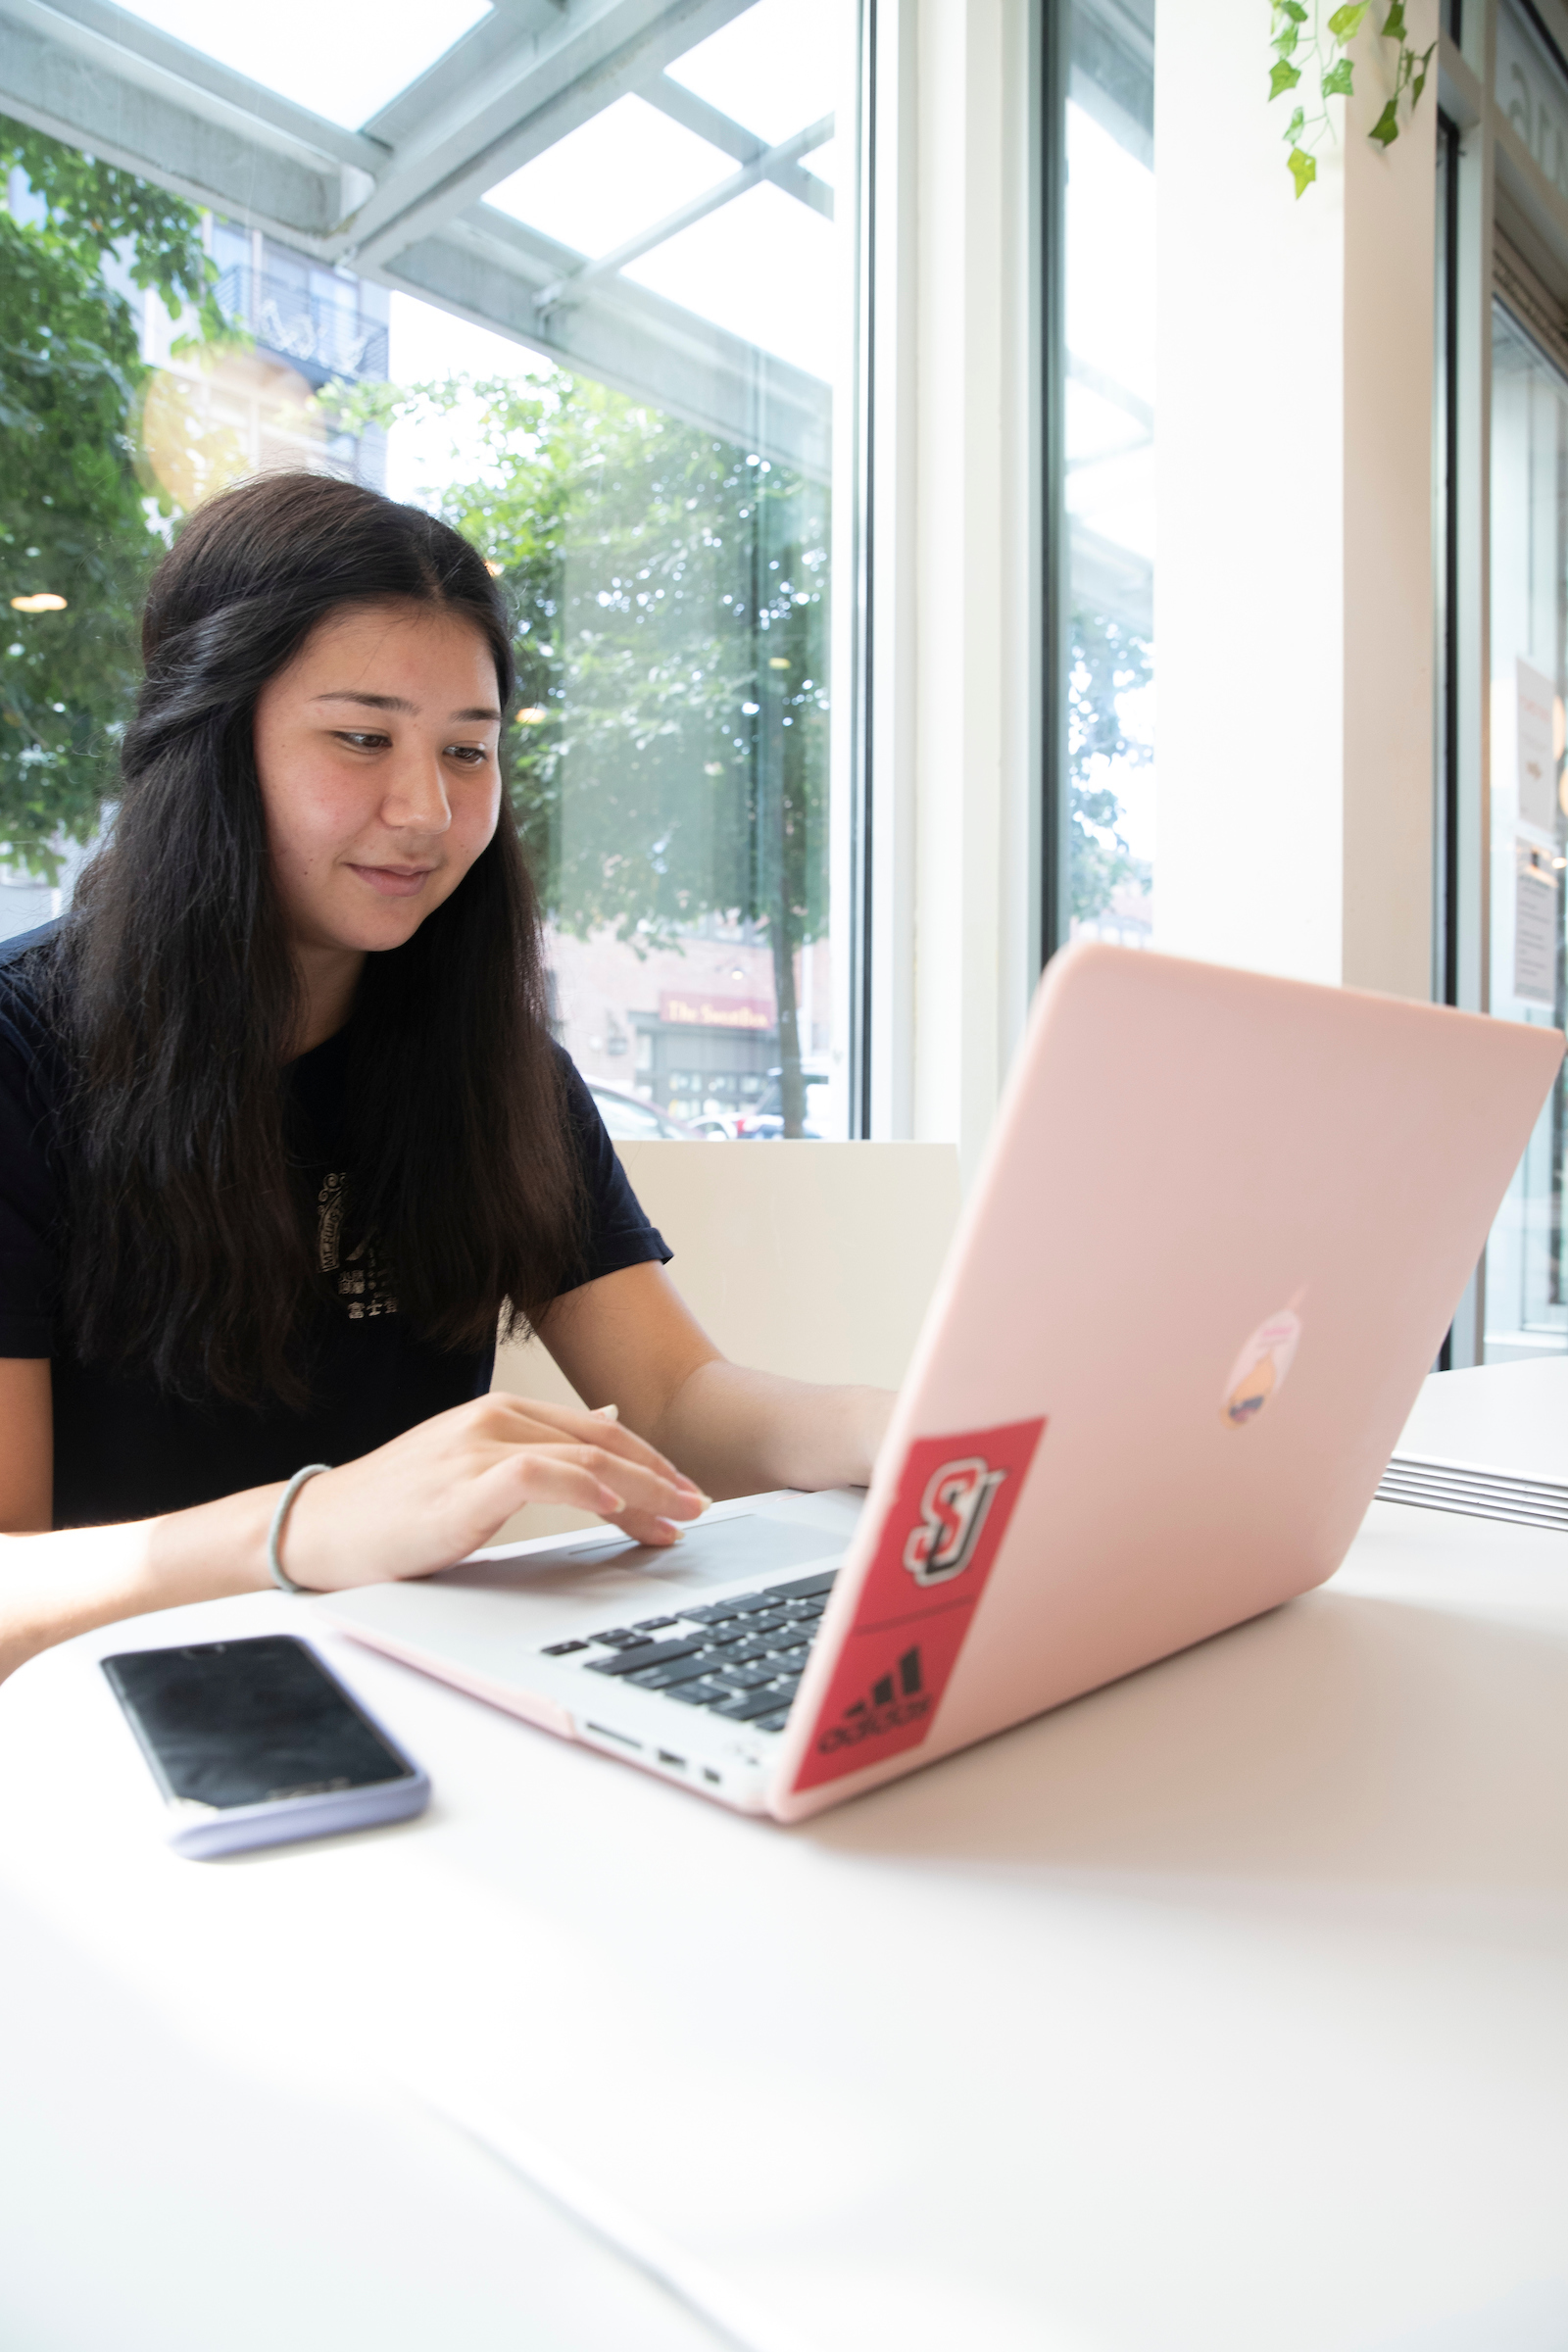 A student on a laptop with the Seattle University interlock logo